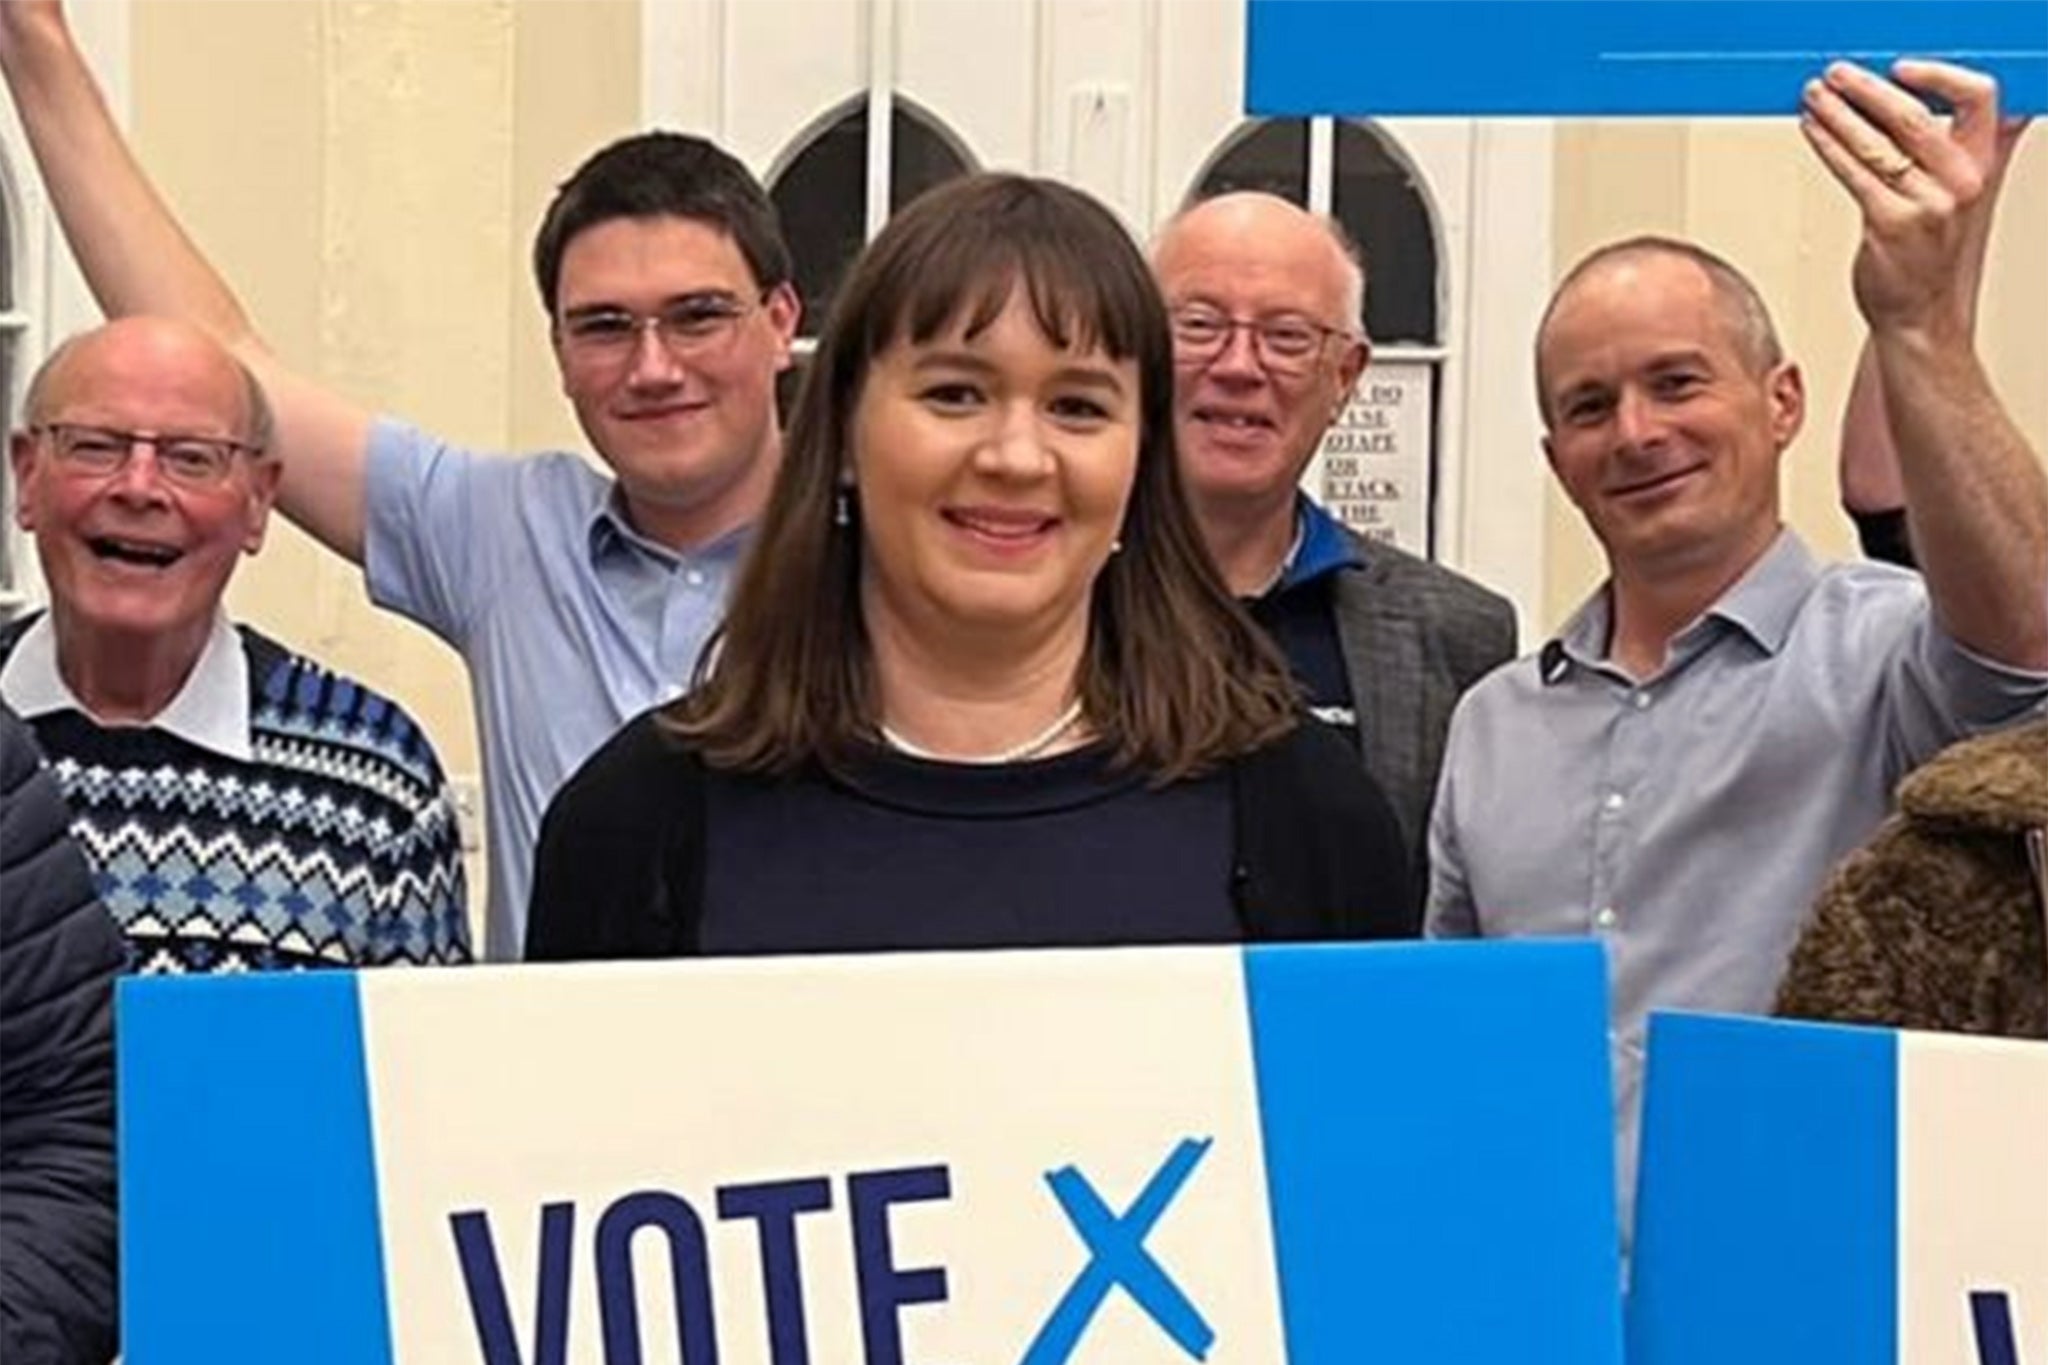 Bristol North West candidate Laura Saunders, who previously worked at Conservative Campaign HQ, has lost the backing of the Conservative party in the wake of a Gambling Commission investigation